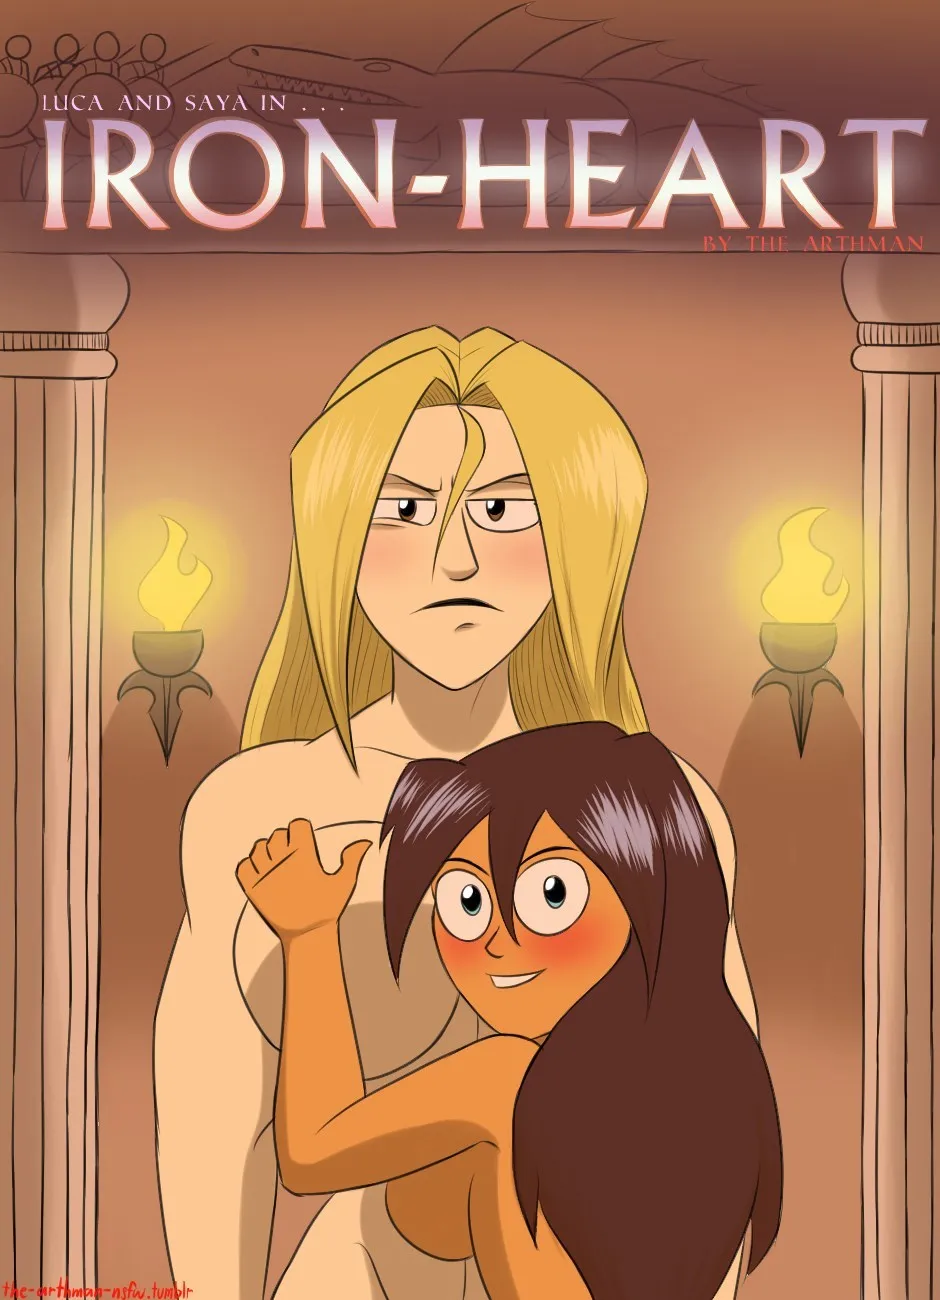 Iron-Heart - Page 1